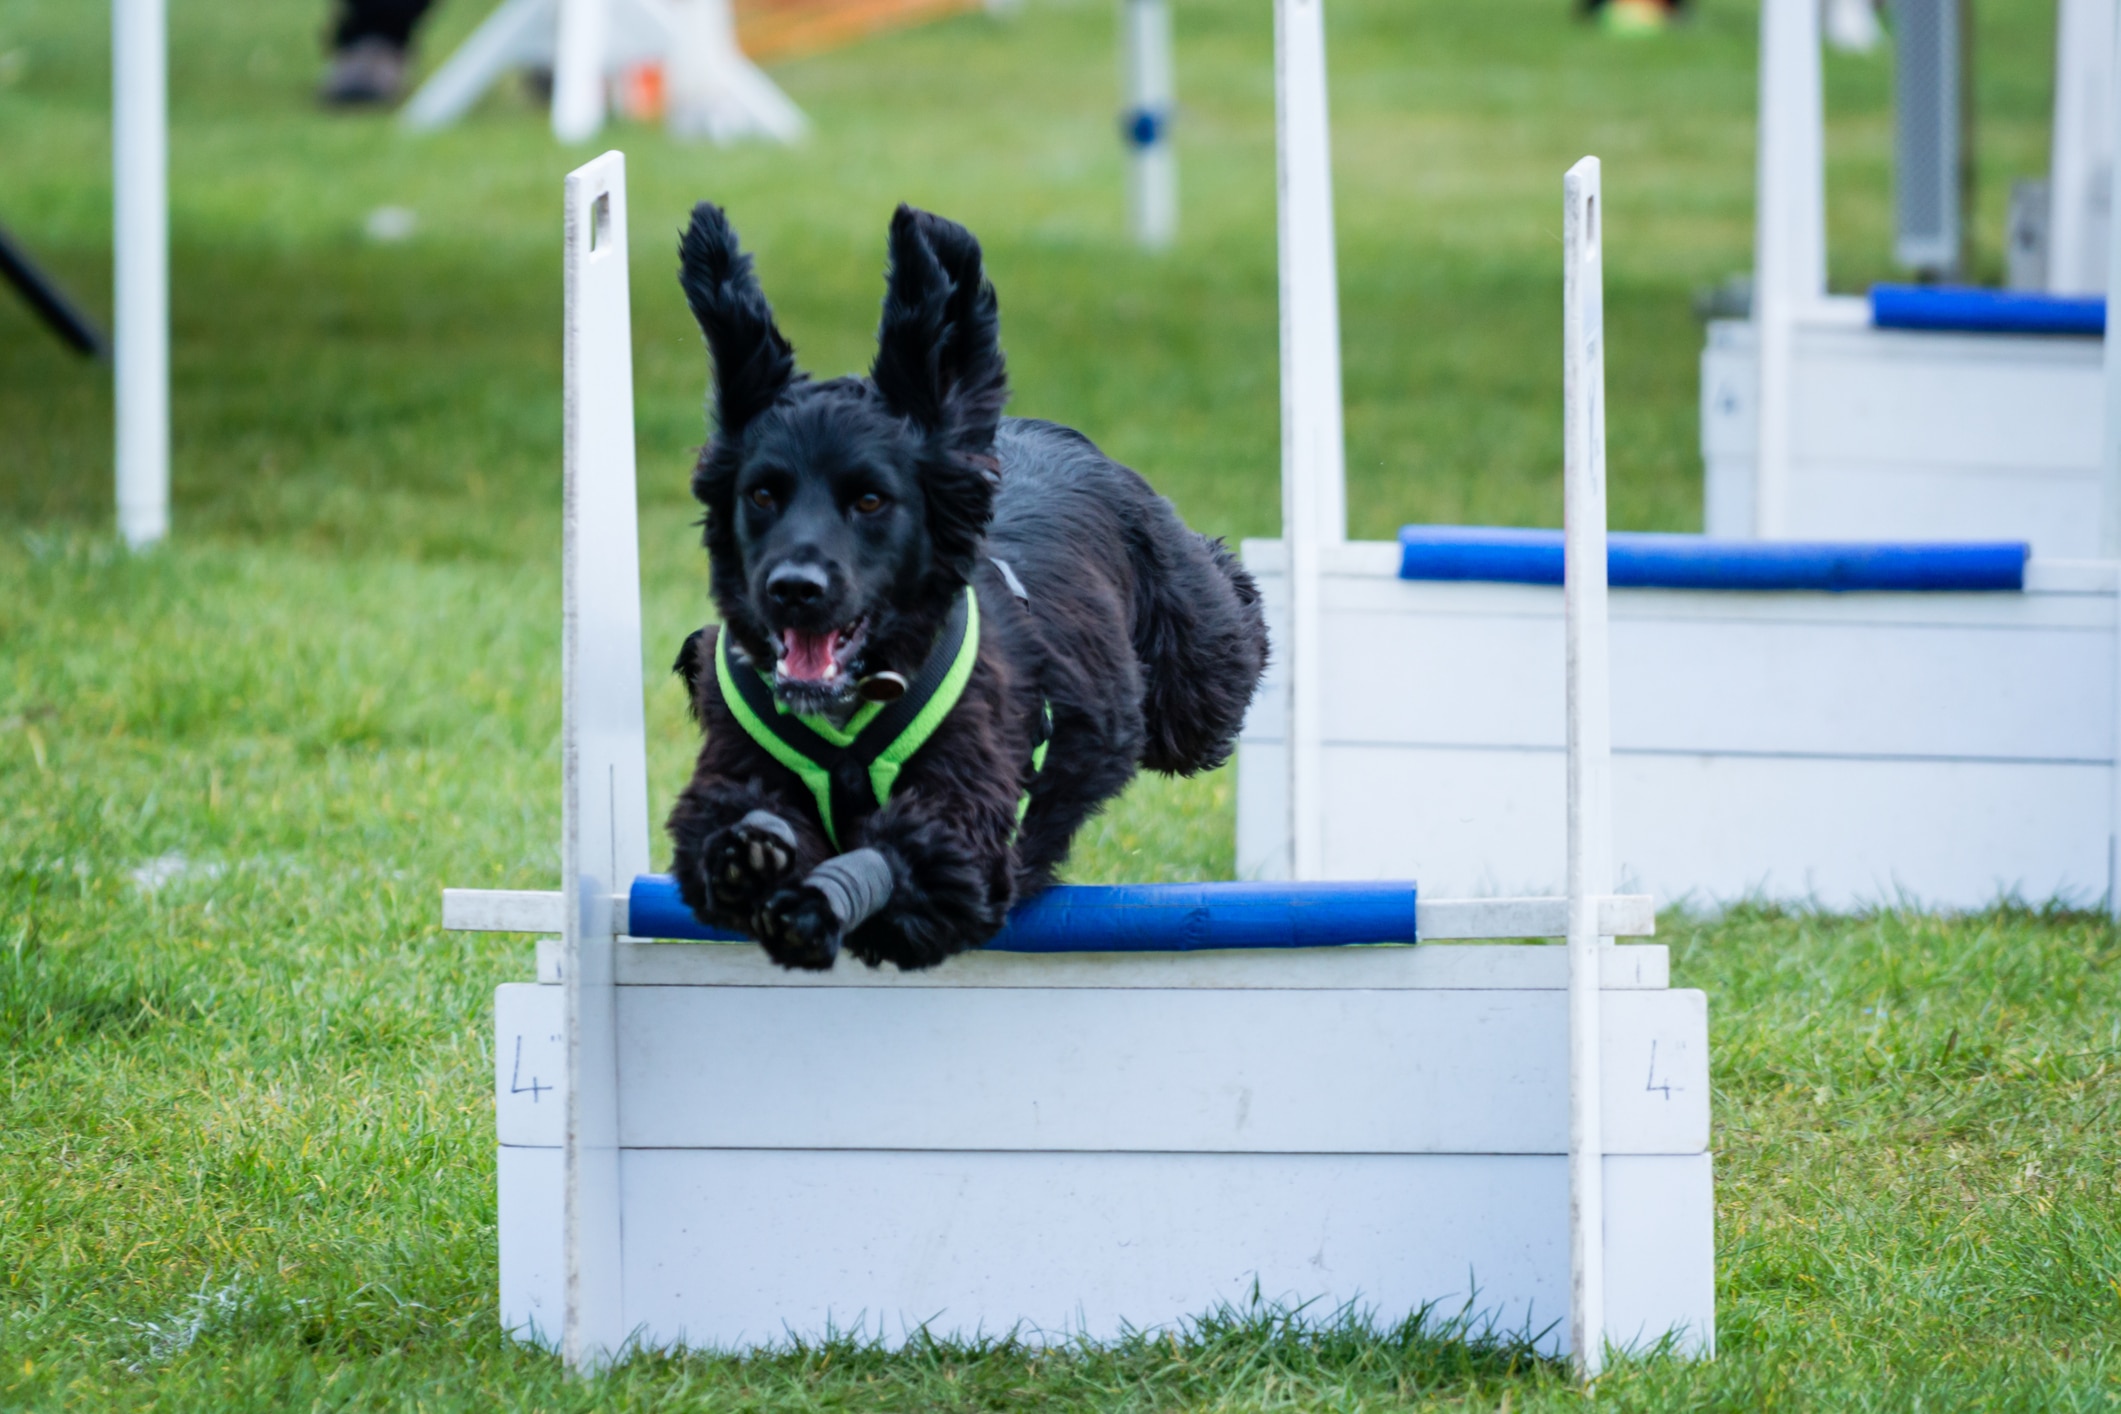 A Spaniel participates in flyball. Featured Image by FranJ K2Photographic/iStock / Getty Images Plus via Getty Images